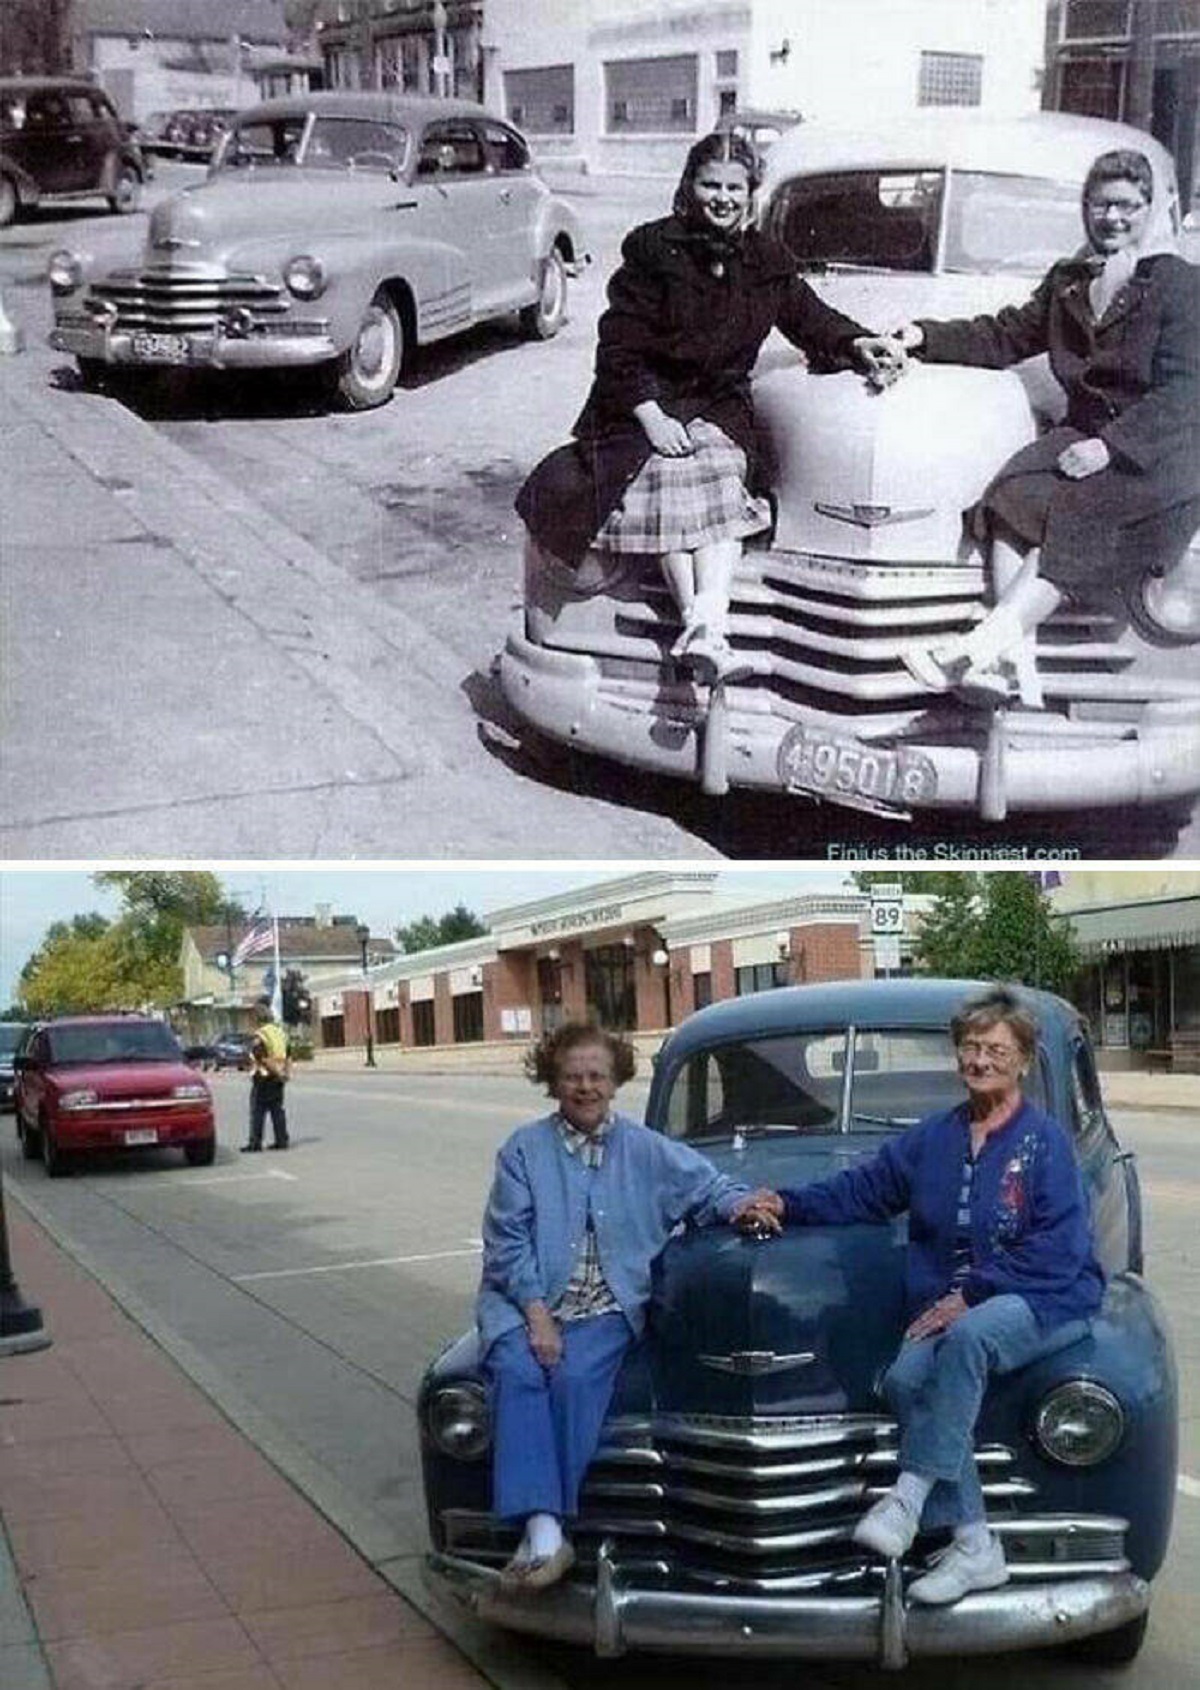 "Sitting On Their 1947 Chevrolet In Front Of A Diner, And Then 63 Years Later"